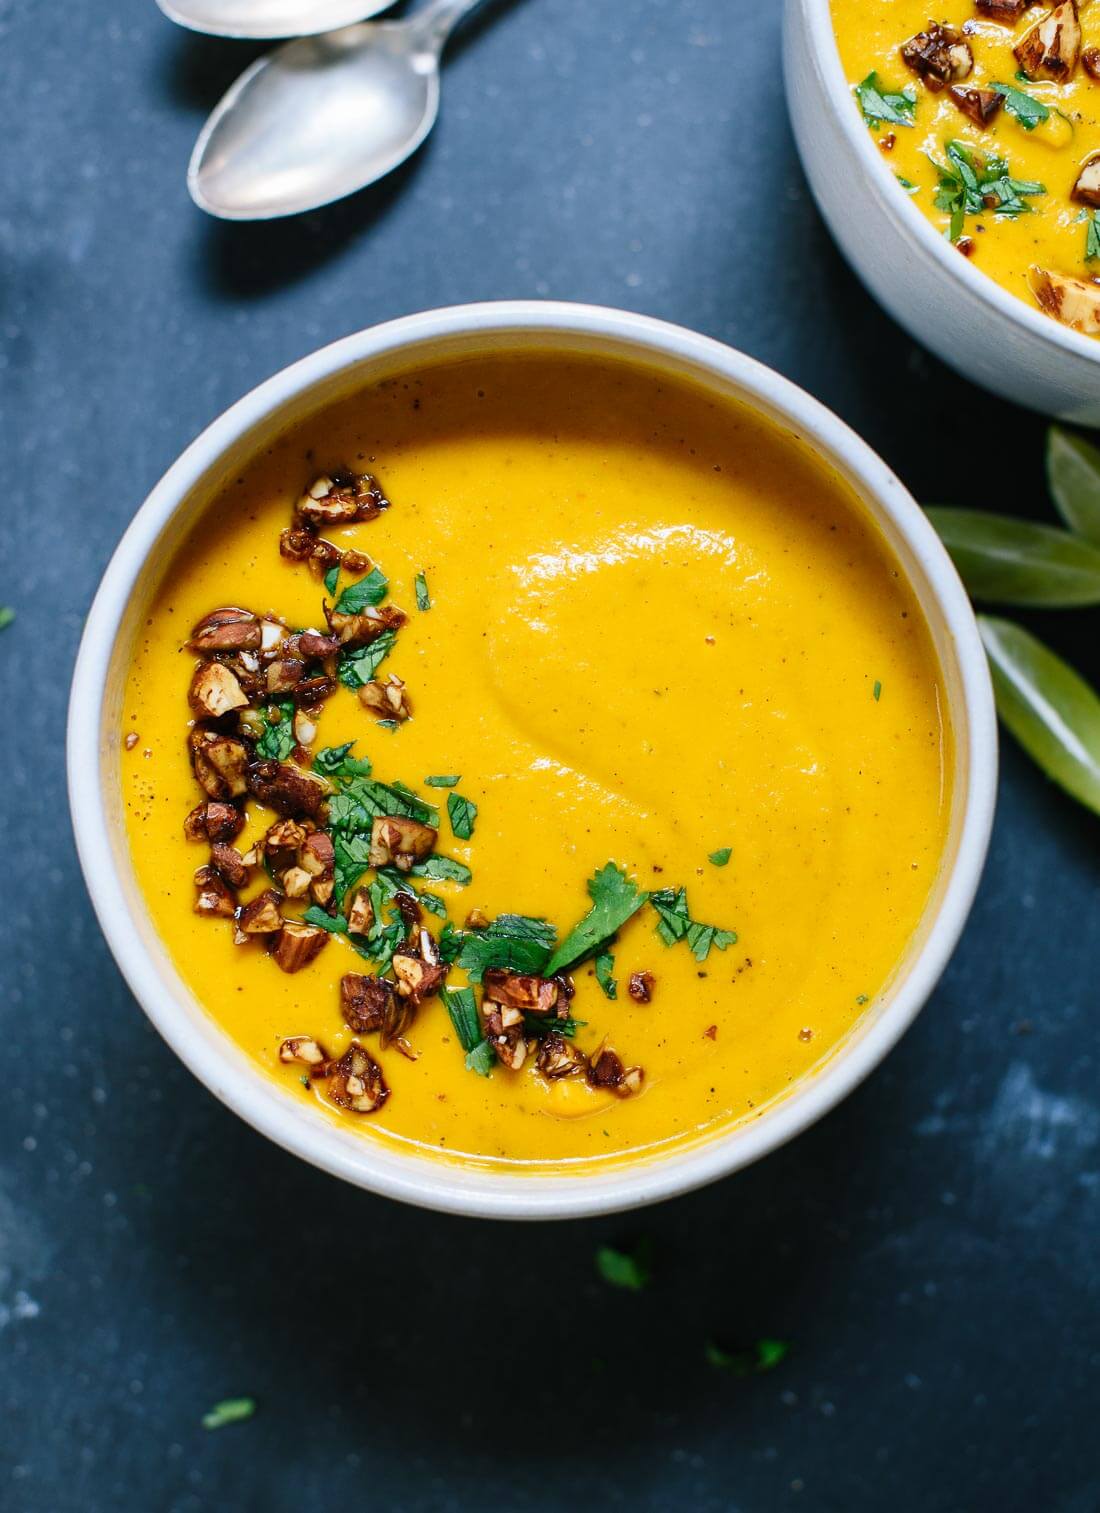 This creamy, Thai-spiced carrot and sweet potato soup comes from Angela Liddon's new cookbook, Oh She Glows Everyday! cookieandkate.com